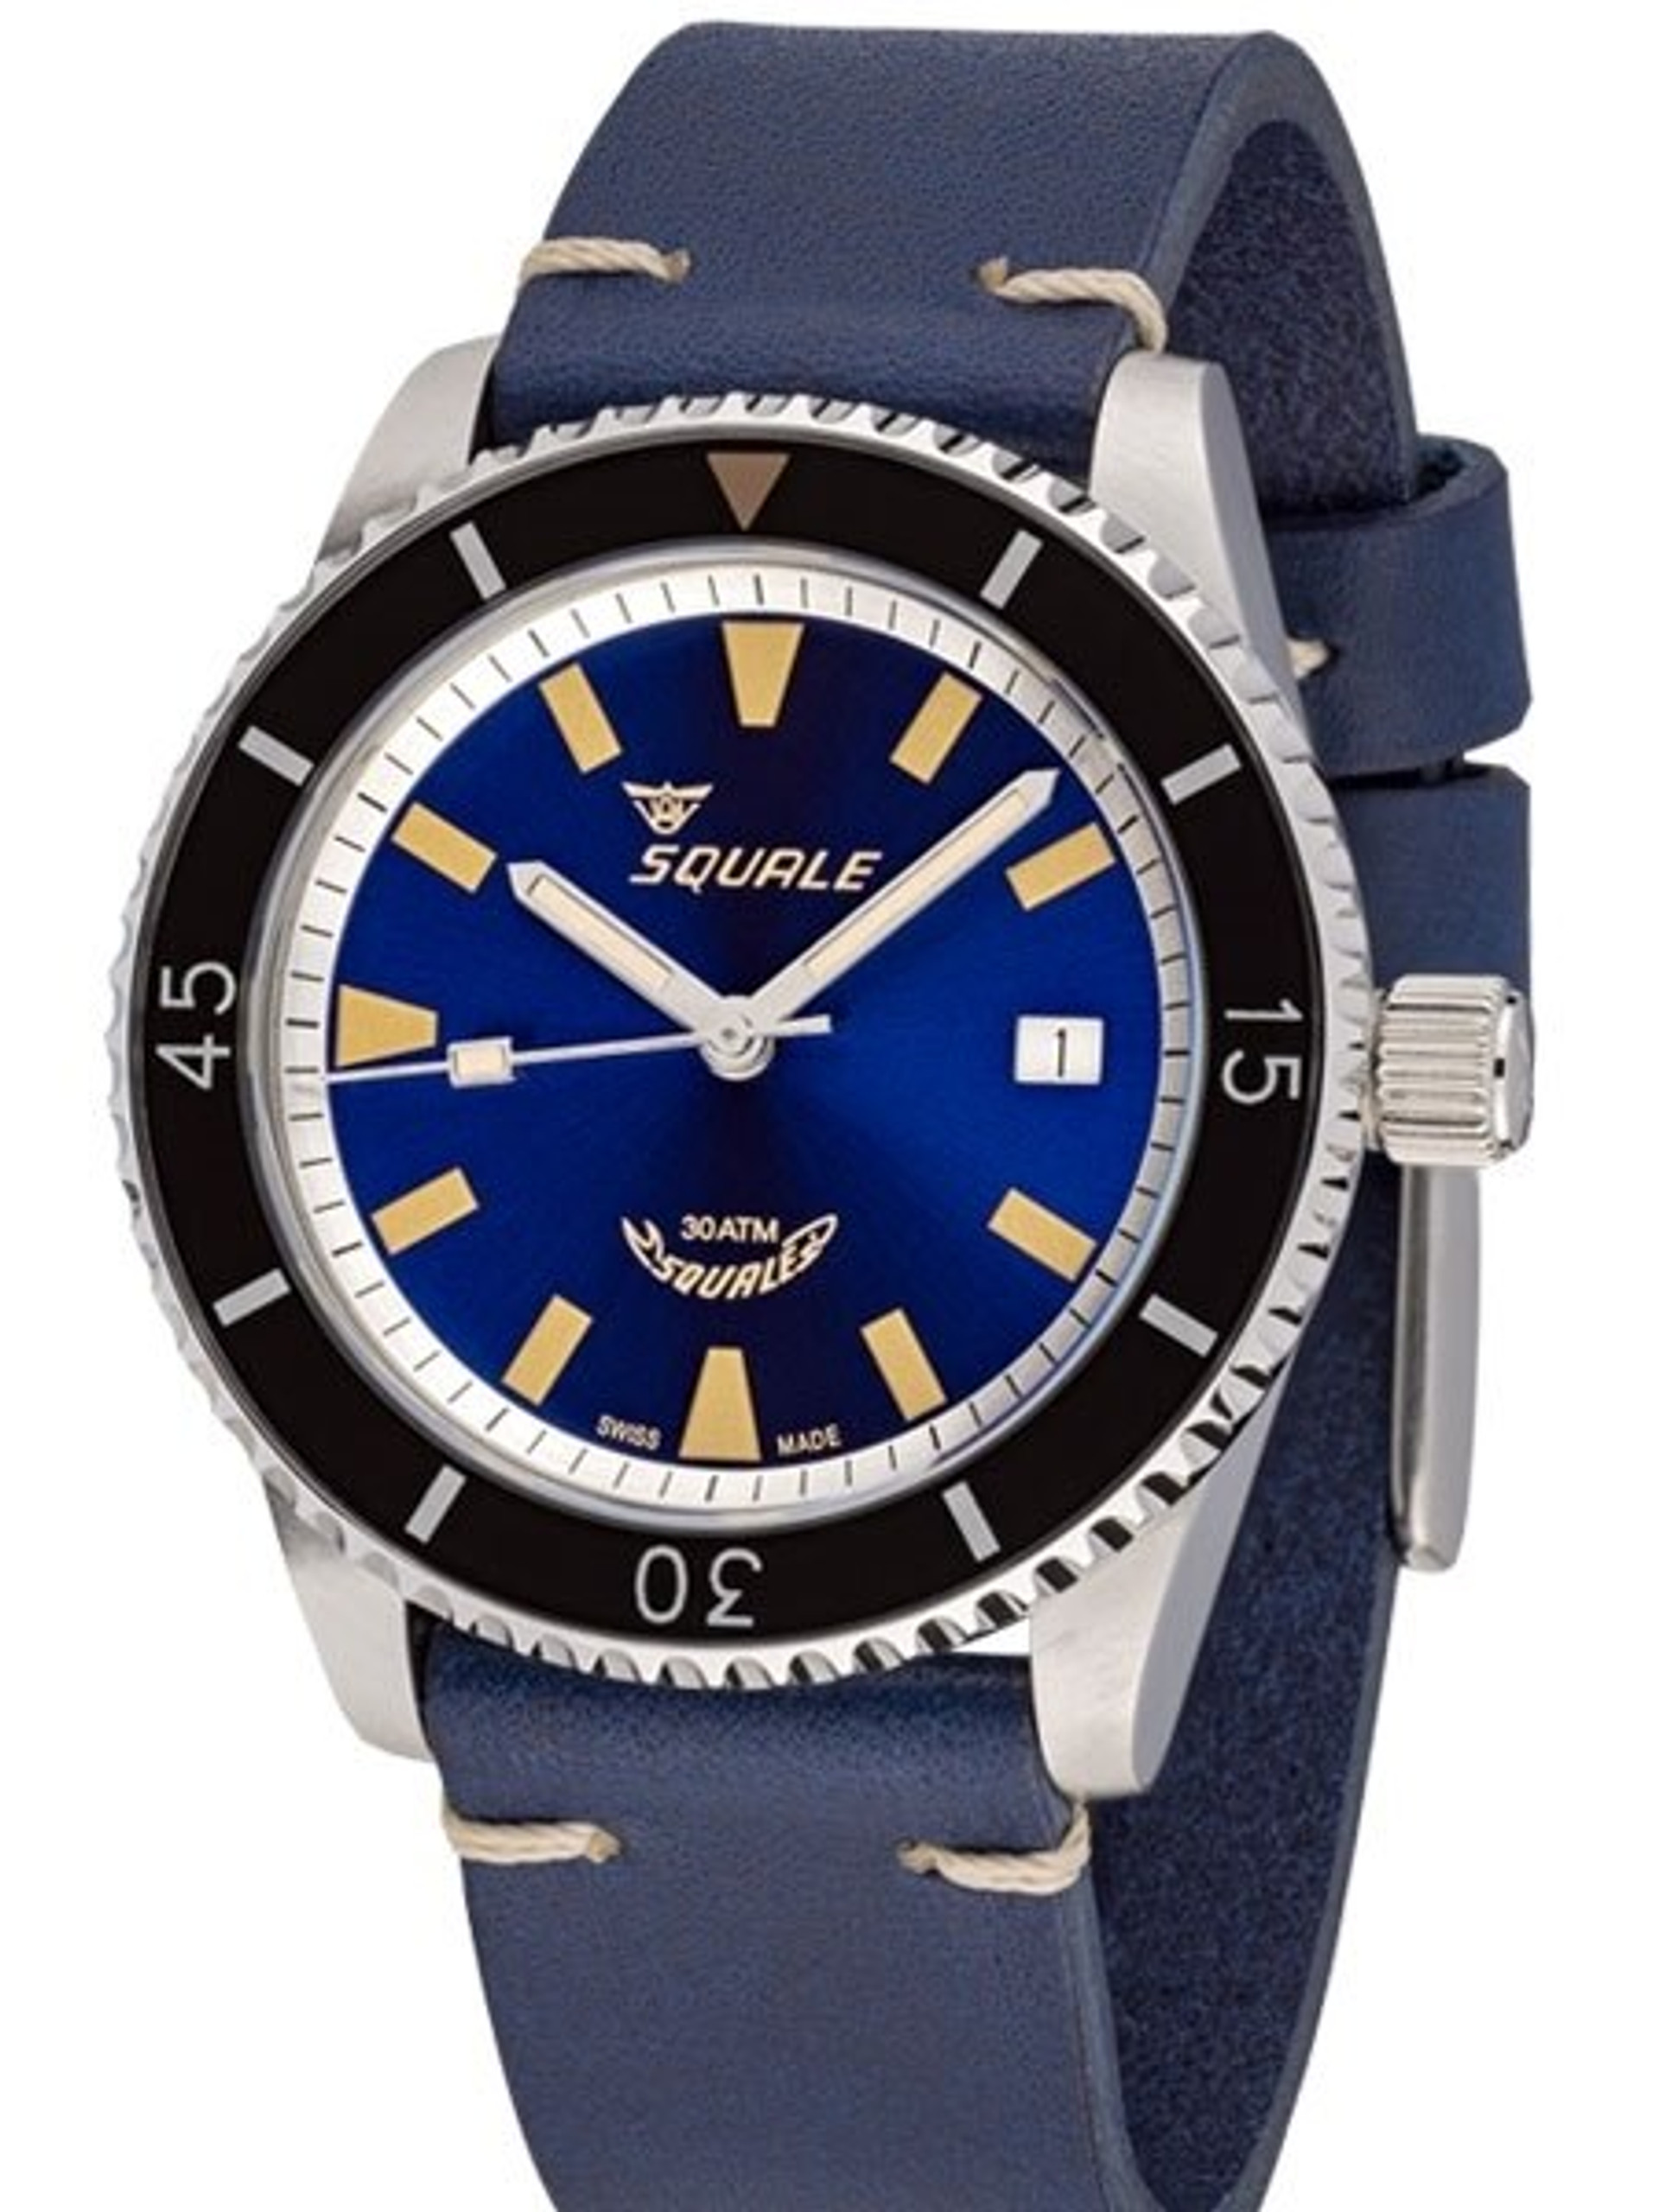 Squale 300 Meter Swiss Made Automatic Dive Watch with Sapphire Crystal ...